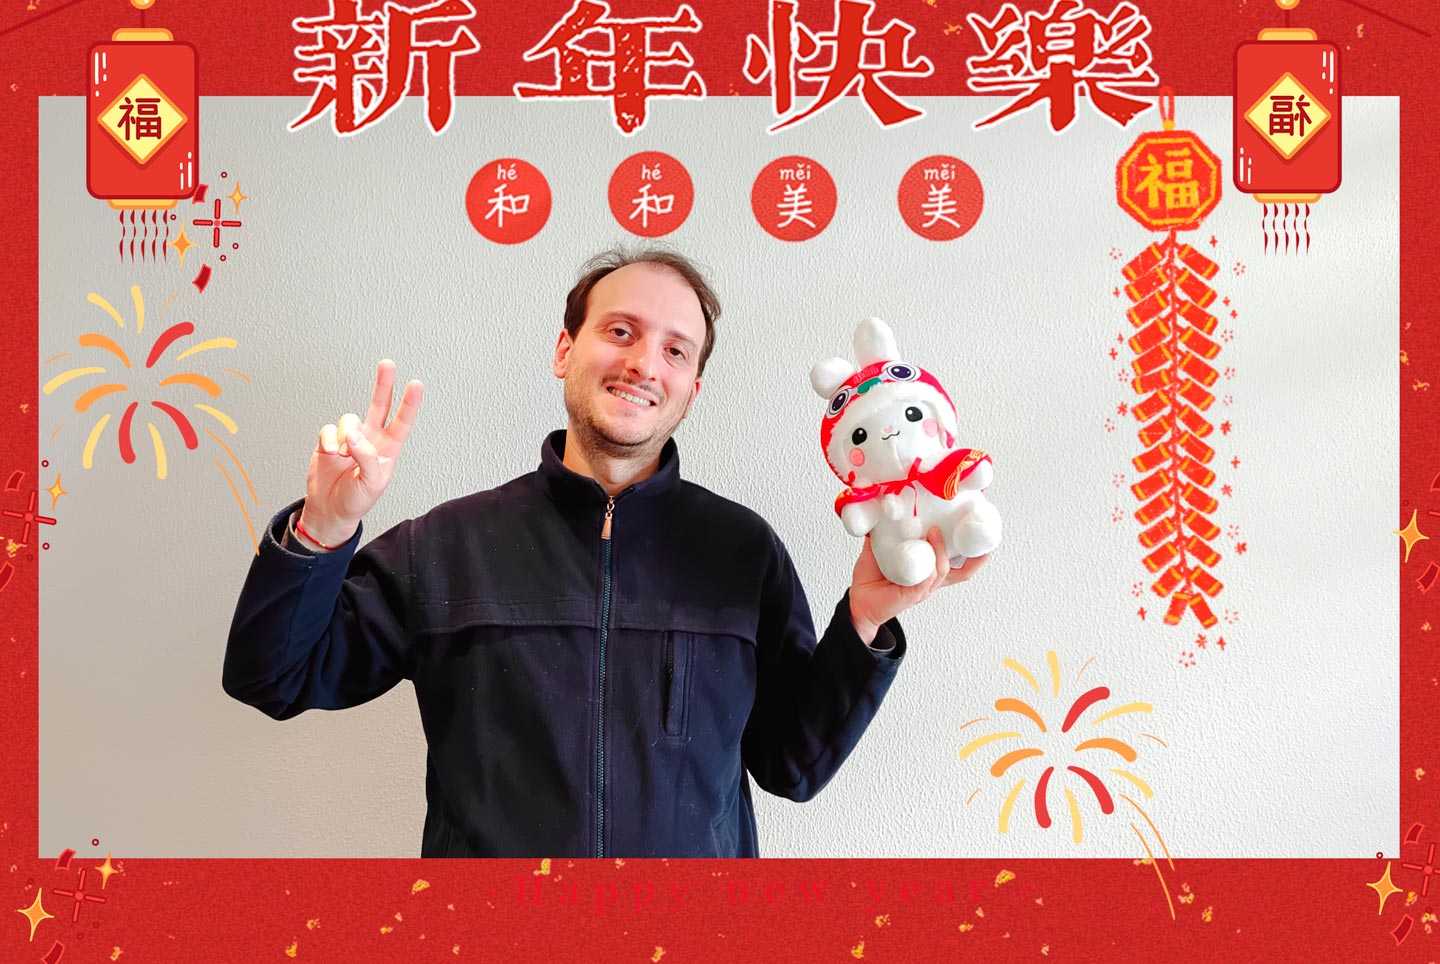 happy new year in chinese characters